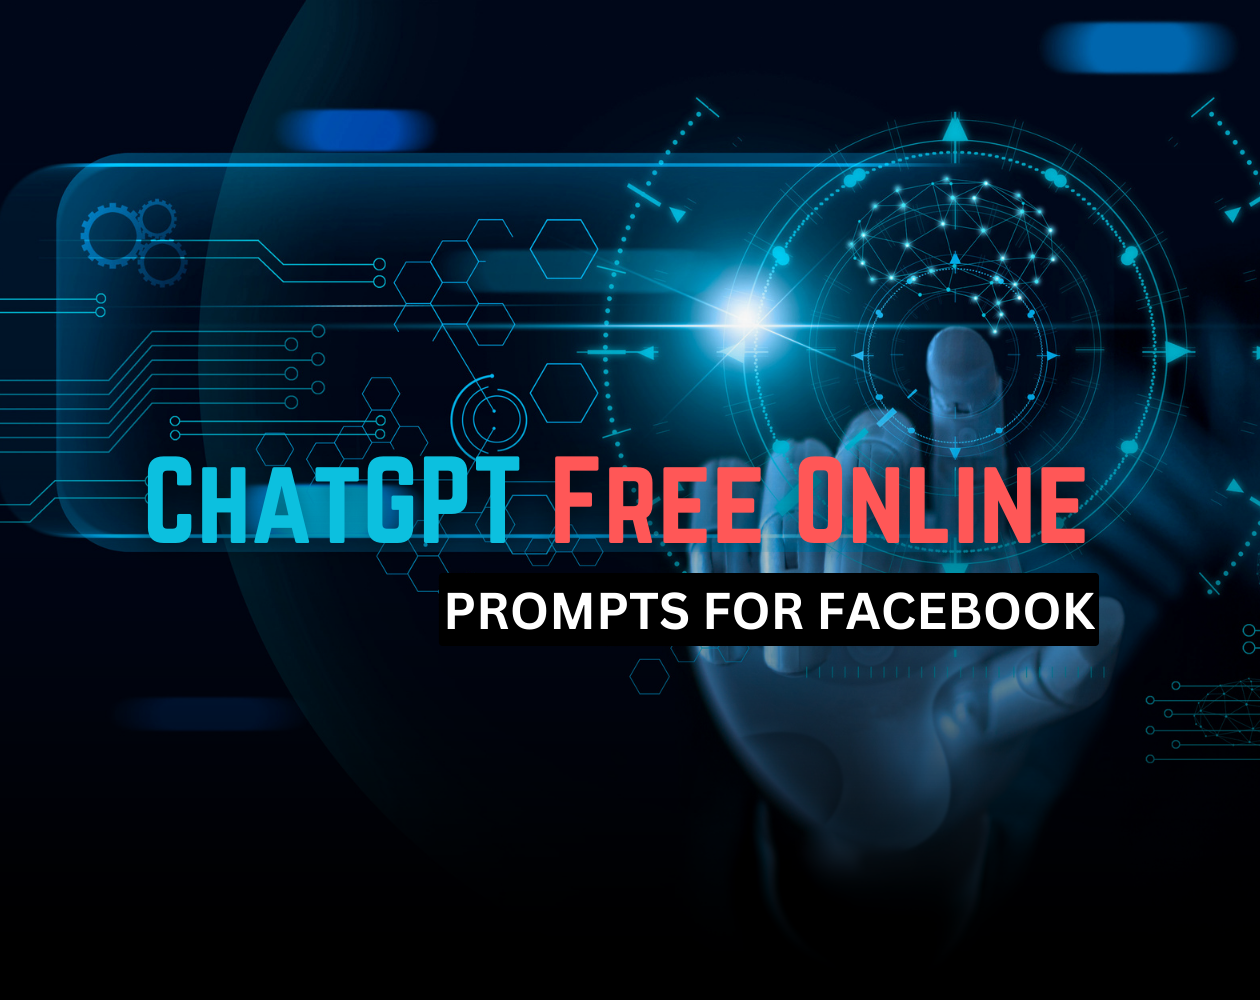 ChatGPT free online prompts on Facebook Content Creation   ChatGPT is shaking up the world of content creation by providing free online prompts that can help generate high-quality content tailored for Facebook.